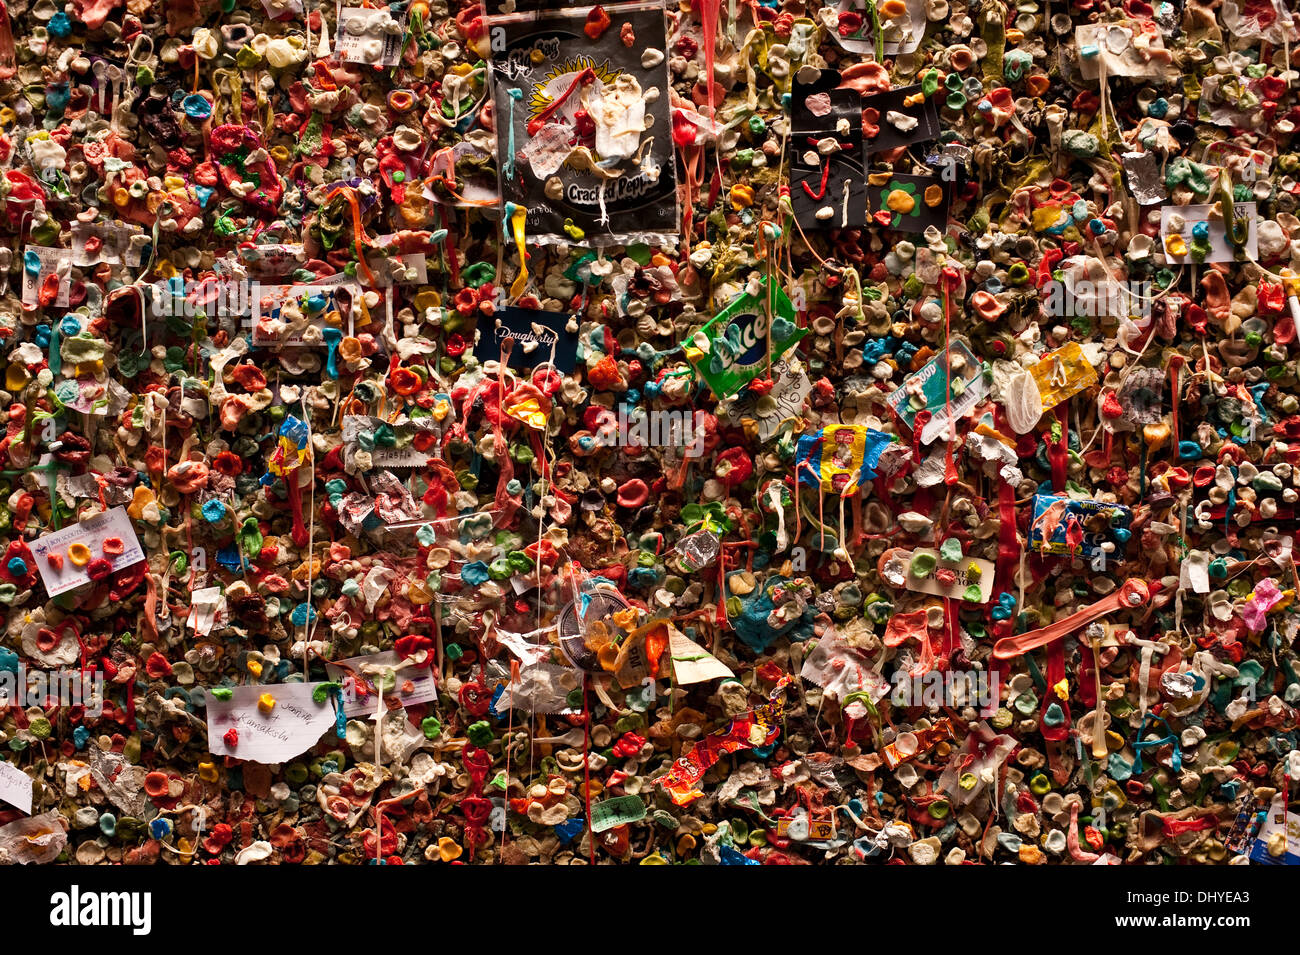 Pike Place market with close-ups of gum wall down alley in Post Alley Seattle Washington State Stock Photo